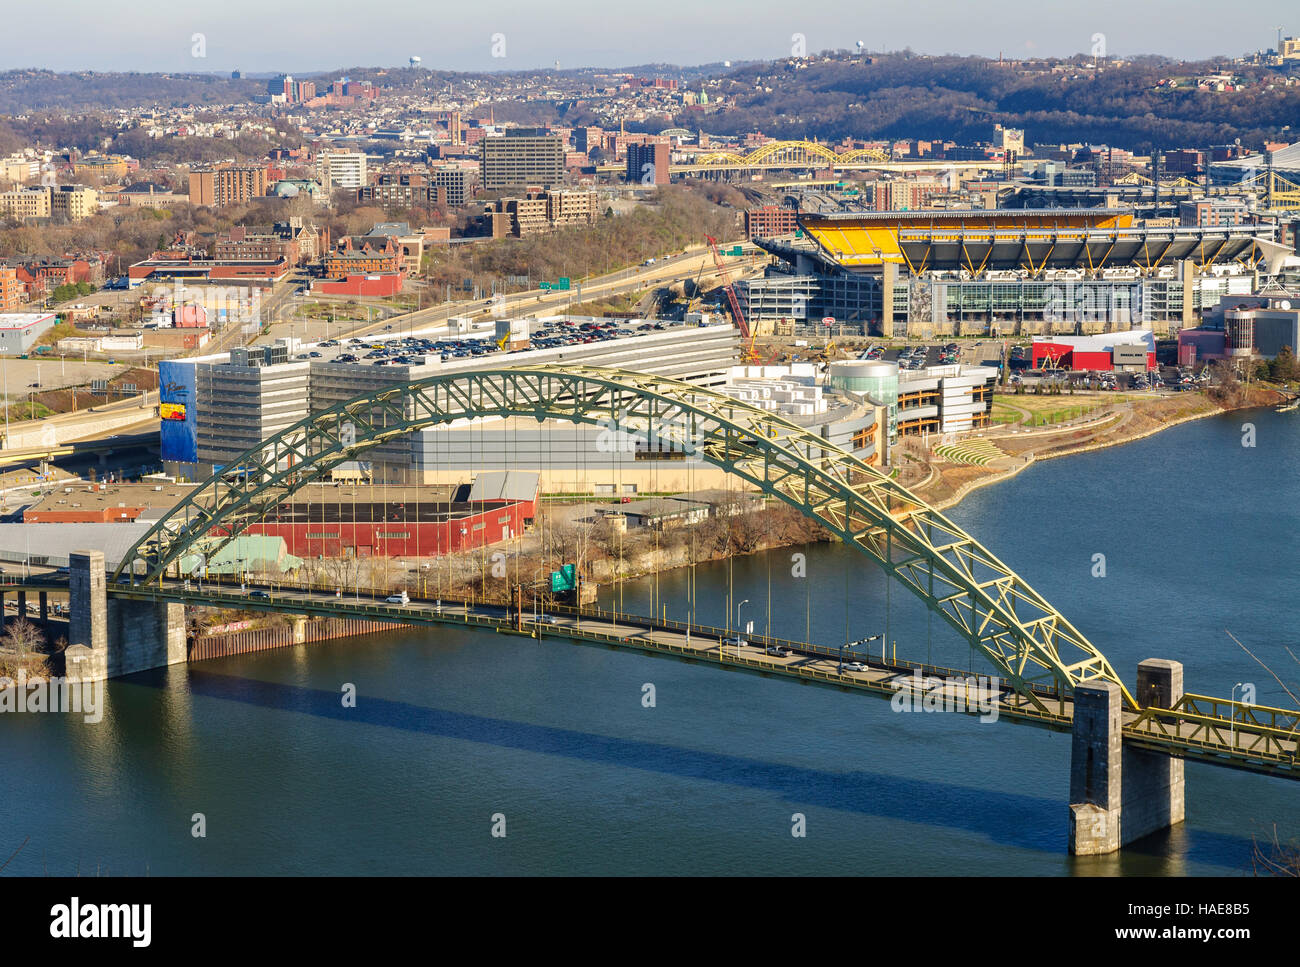 Allegheny River Burgh Central Business District Stockfoto